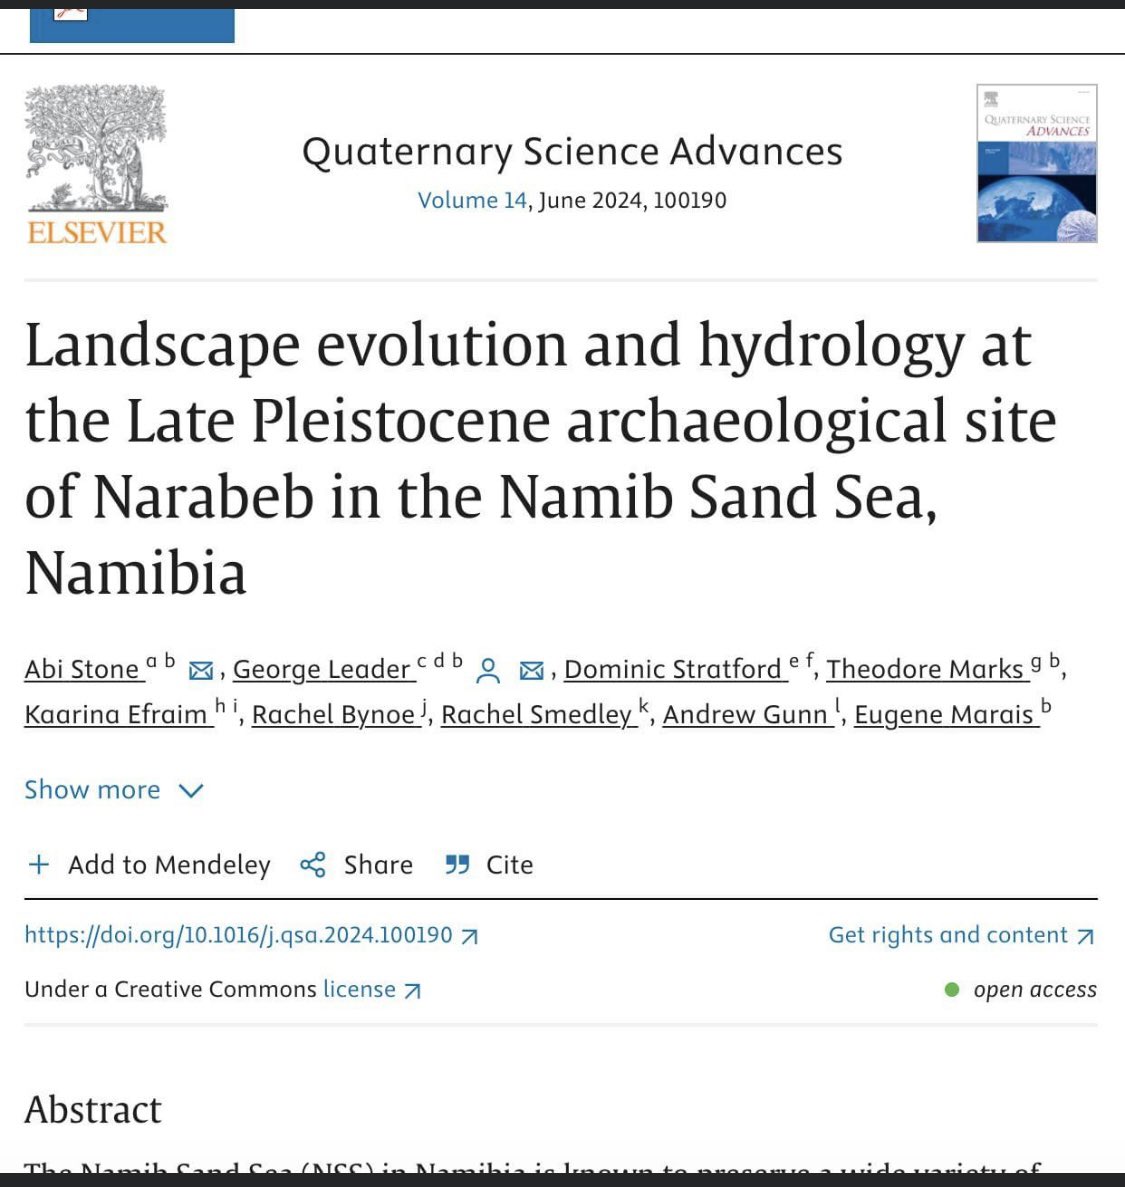 Our new paper is out in QSA. Really great job at understanding and dating an MSA site in the middle of the arid Namib Desert. doi.org/10.1016/j.qsa.… @AbiStone is awesome.